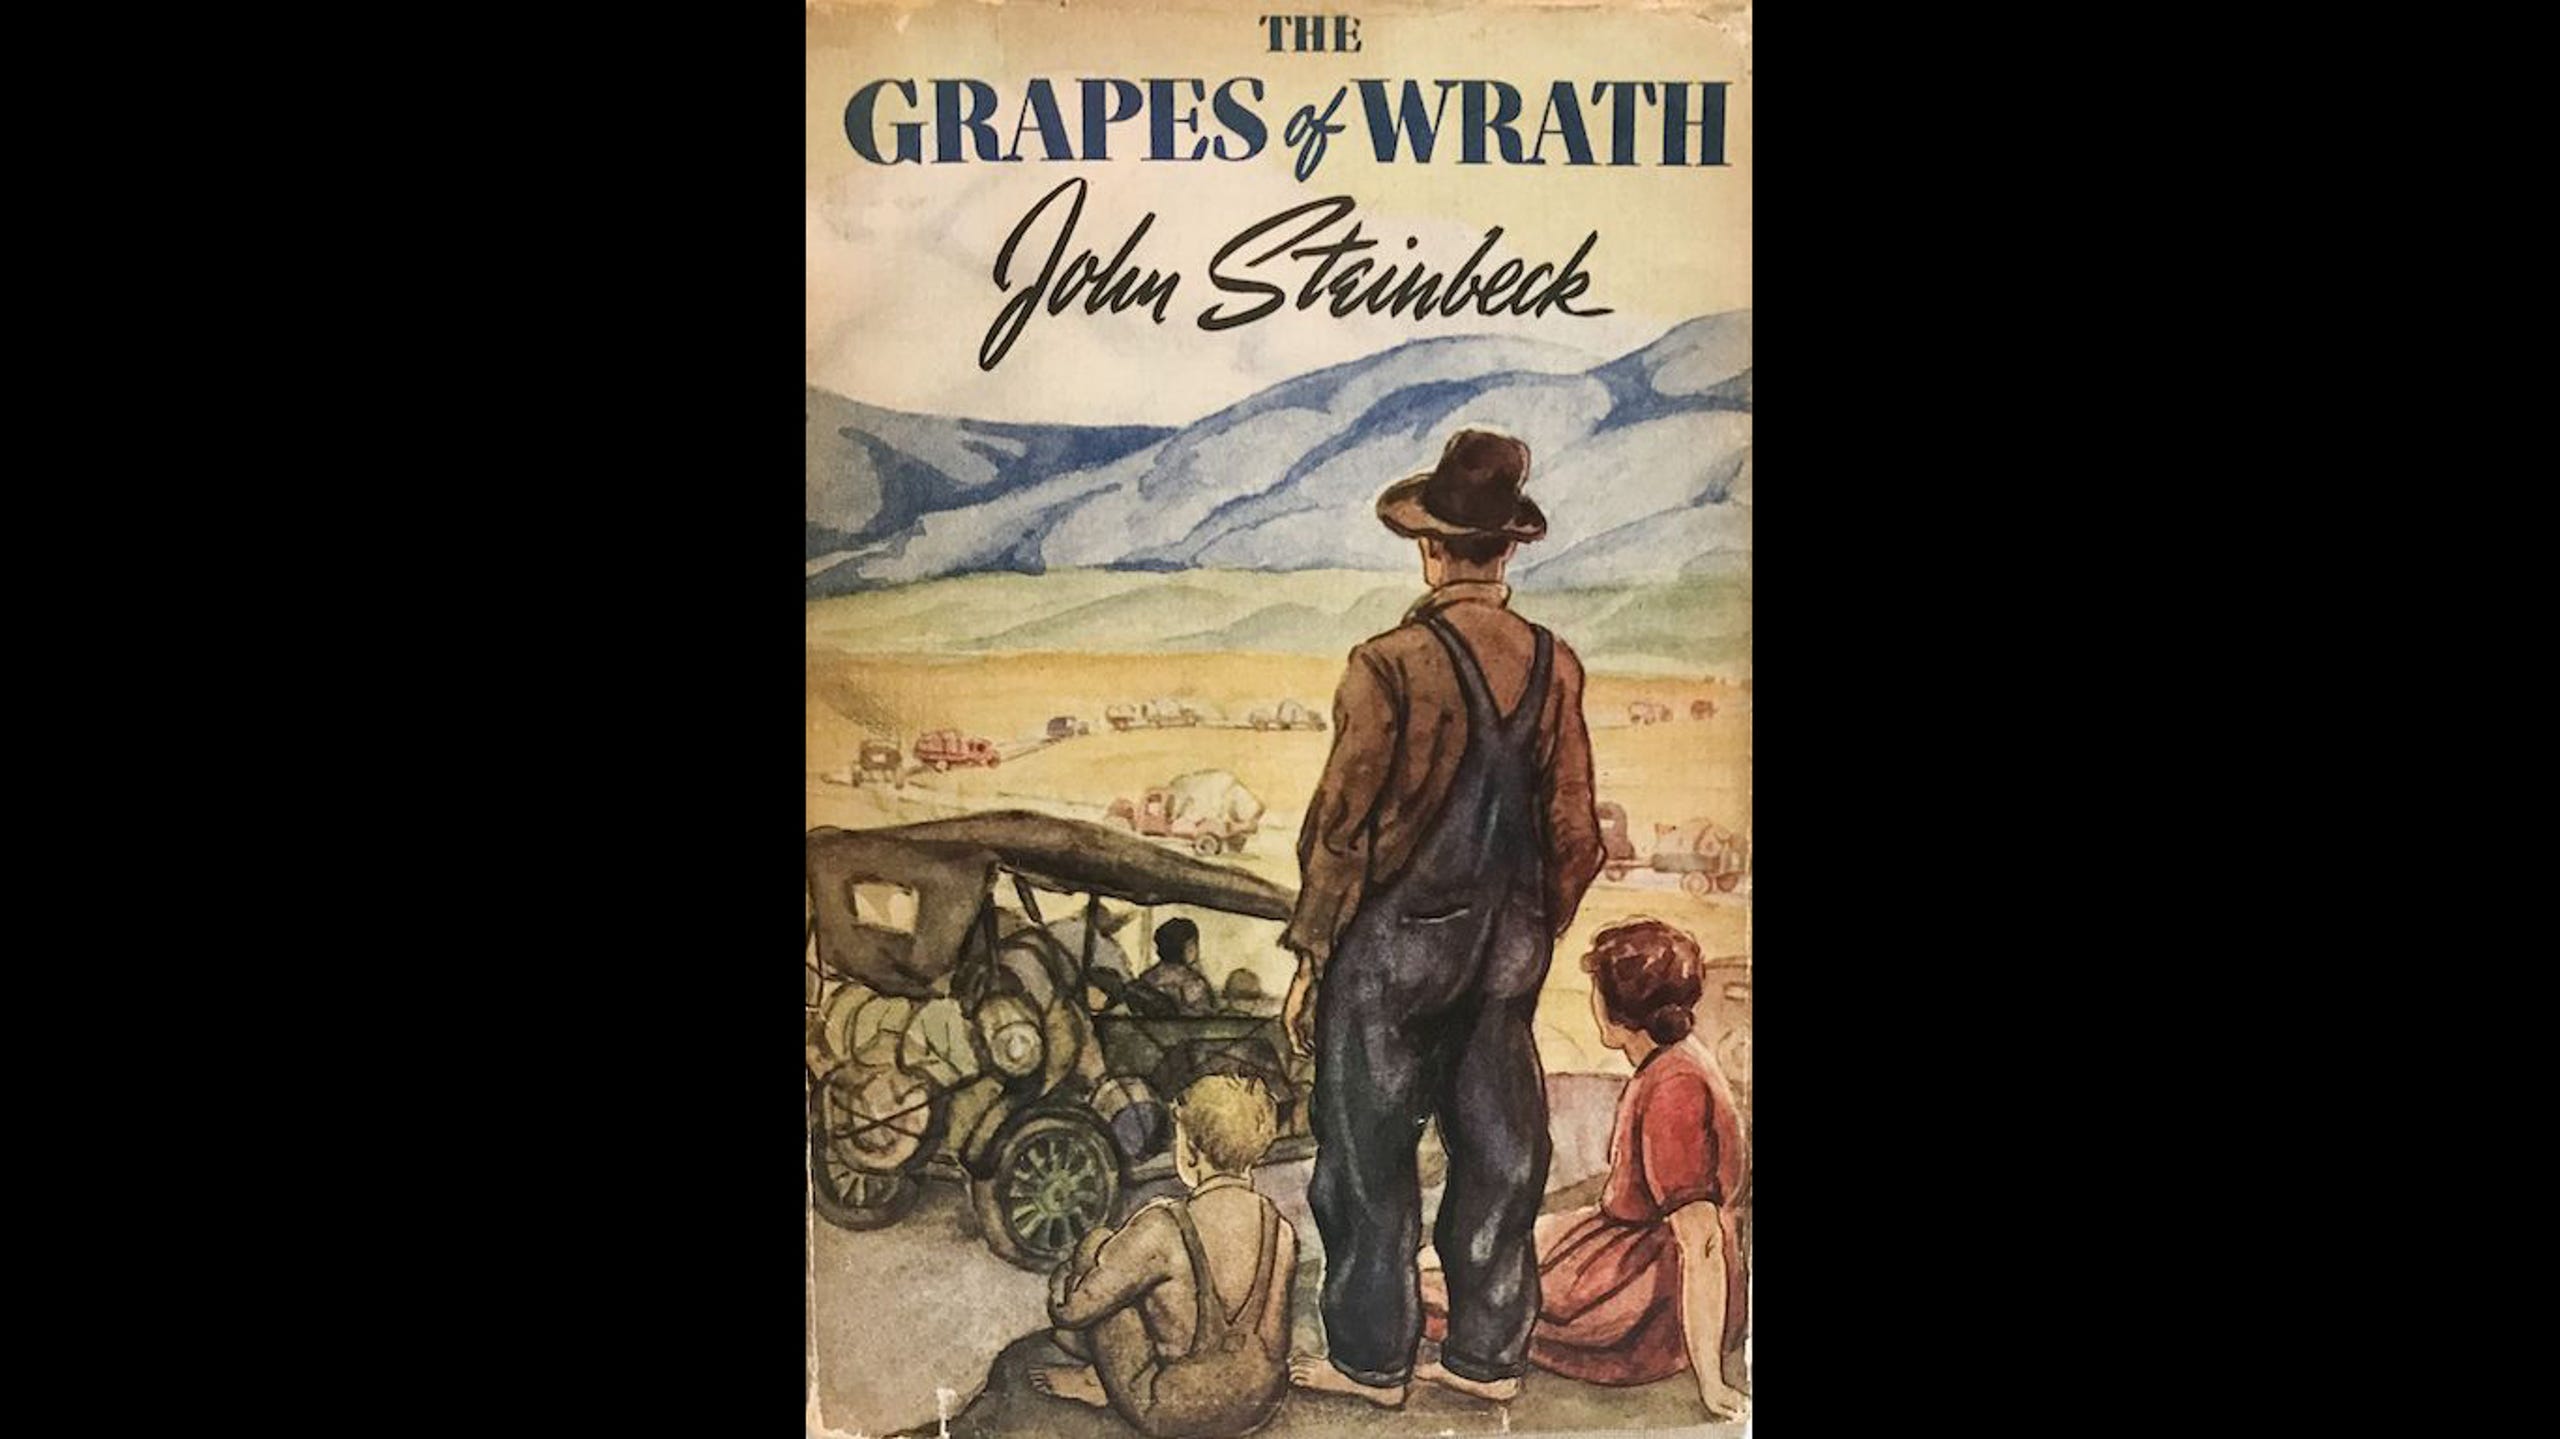 <strong>8. The Grapes of Wrath </strong><strong>• Author:</strong> John Steinbeck <strong>• Originally published in:</strong> 1939 <strong>• </strong>The novel is basically about the endurance of hardship during one of America's darkest times, the Great Depression. "Its depiction of the Depression era makes it a must-read for those who do not know our own history and how class struggle was and remains a real issue," according to Uruburu.